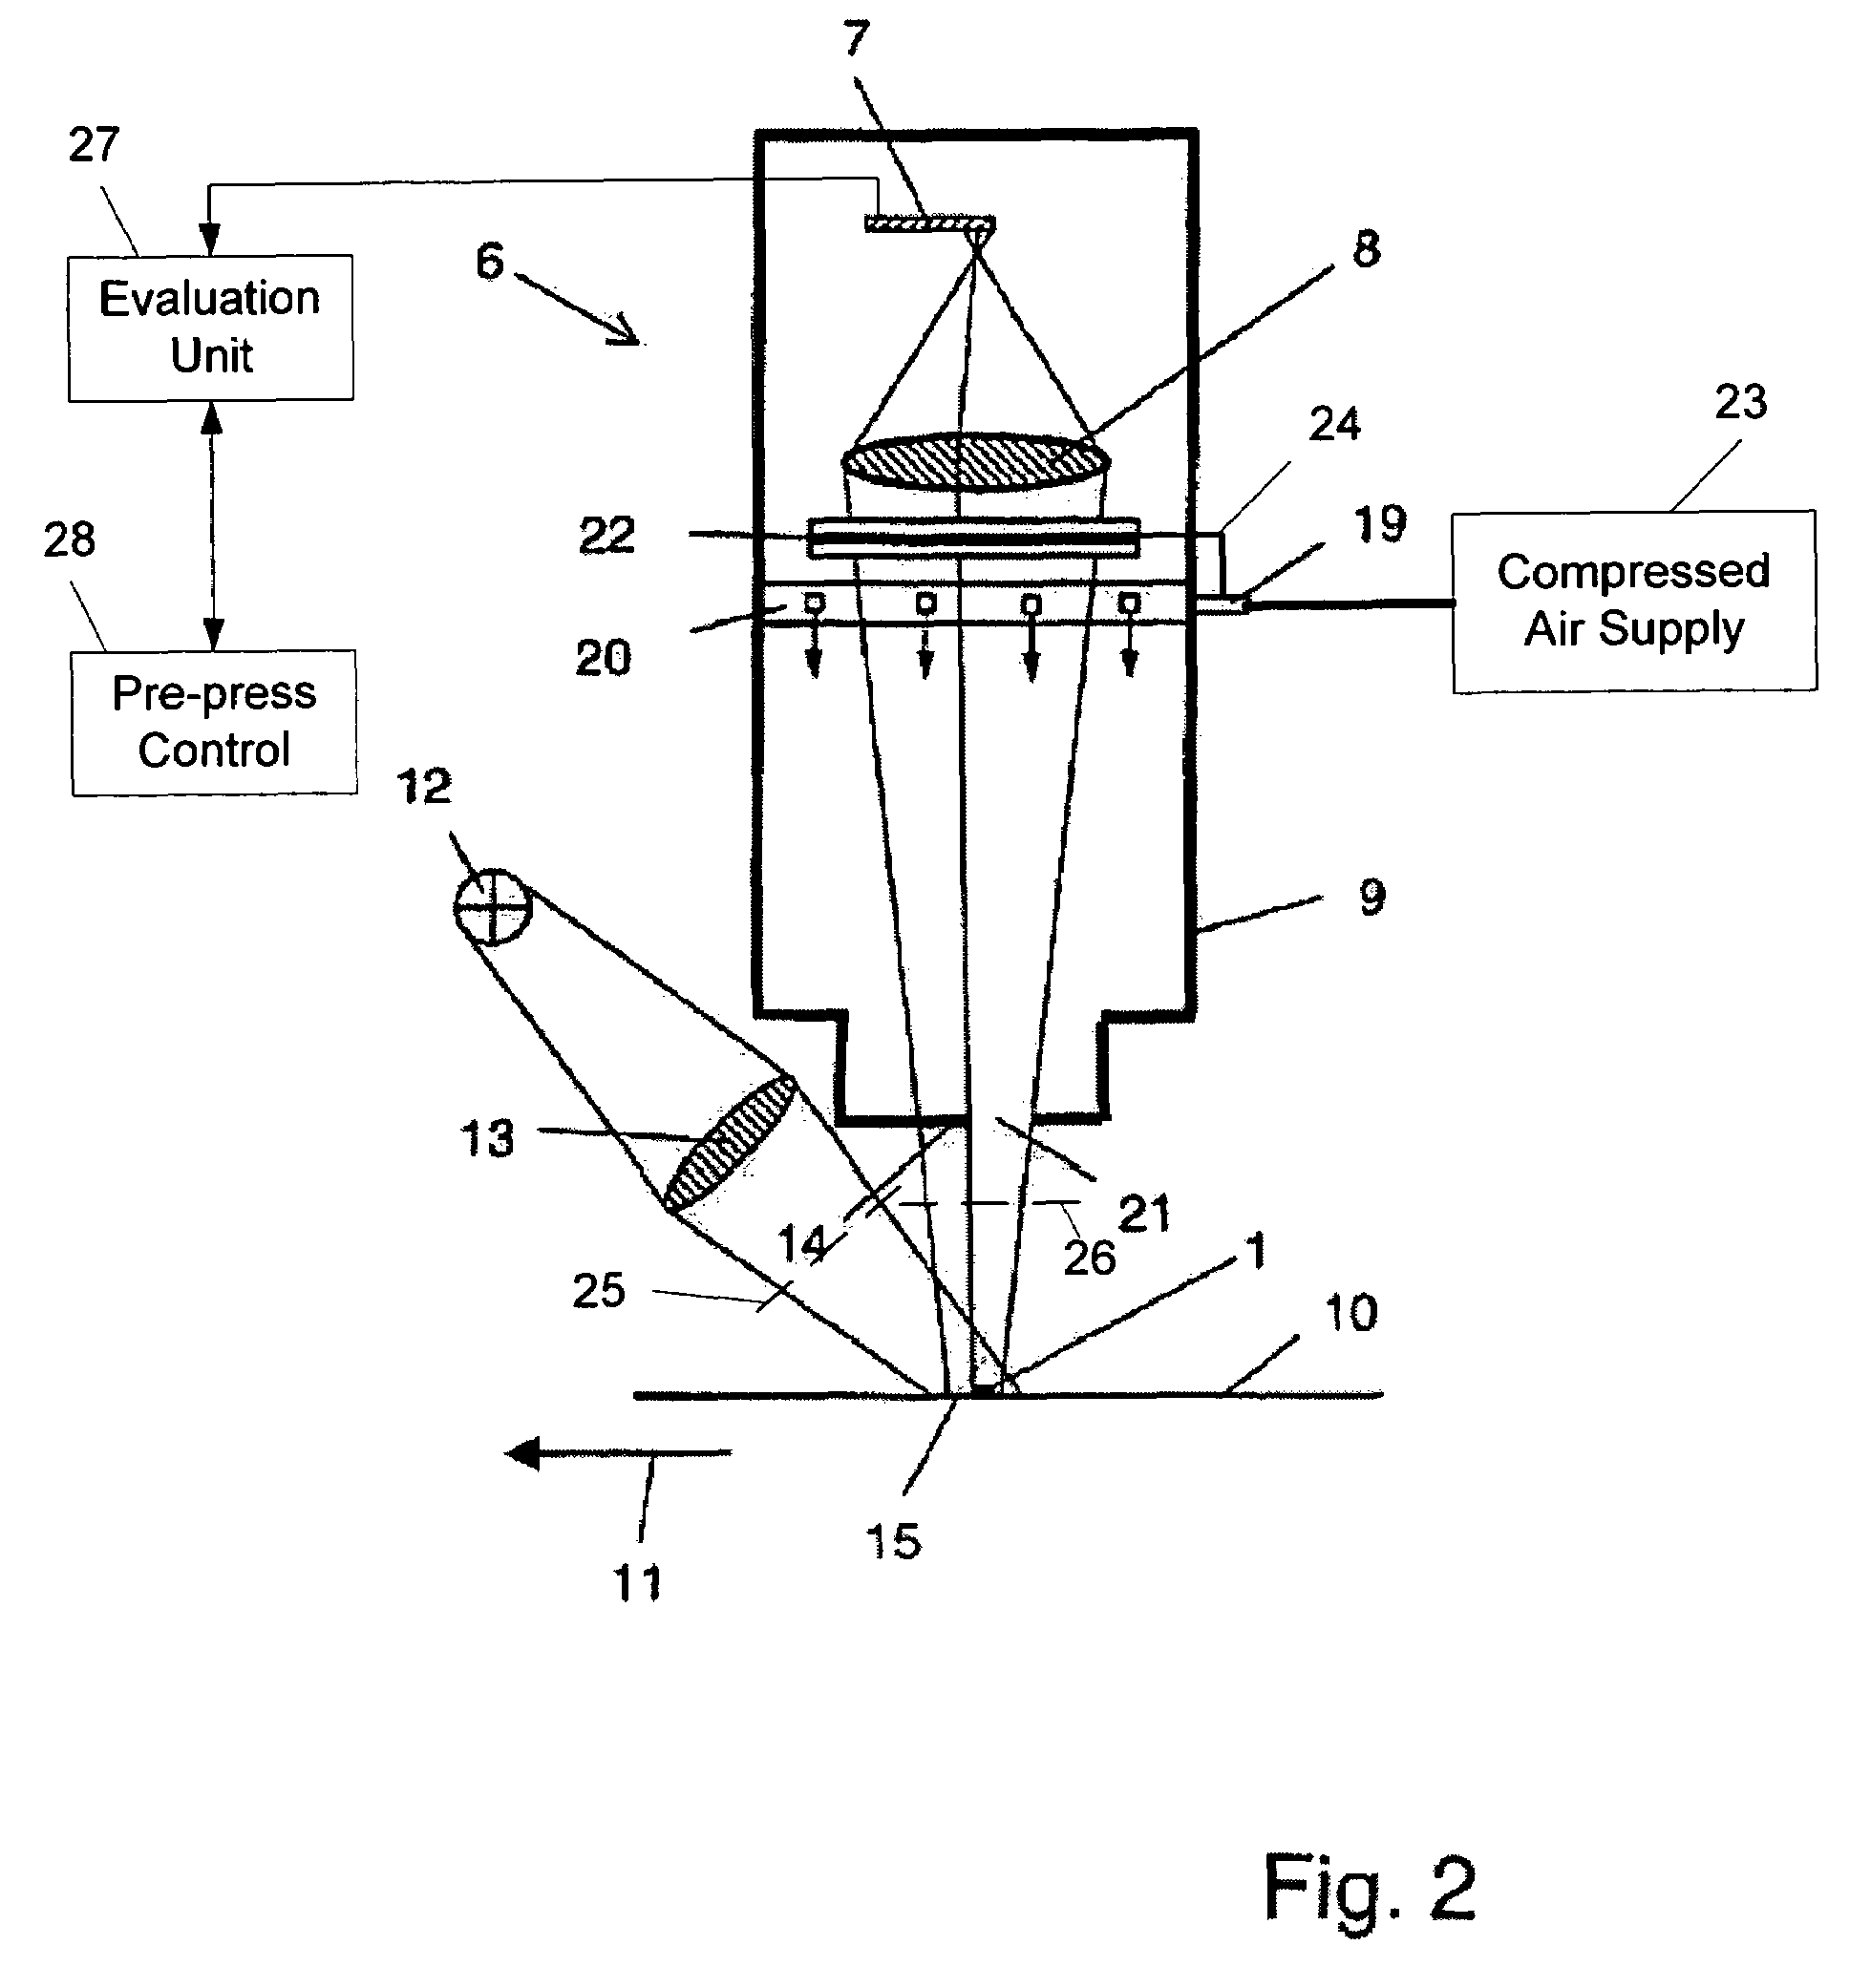 Apparatus and method for acquiring and evaluating an image from a predetermined extract of a printed product